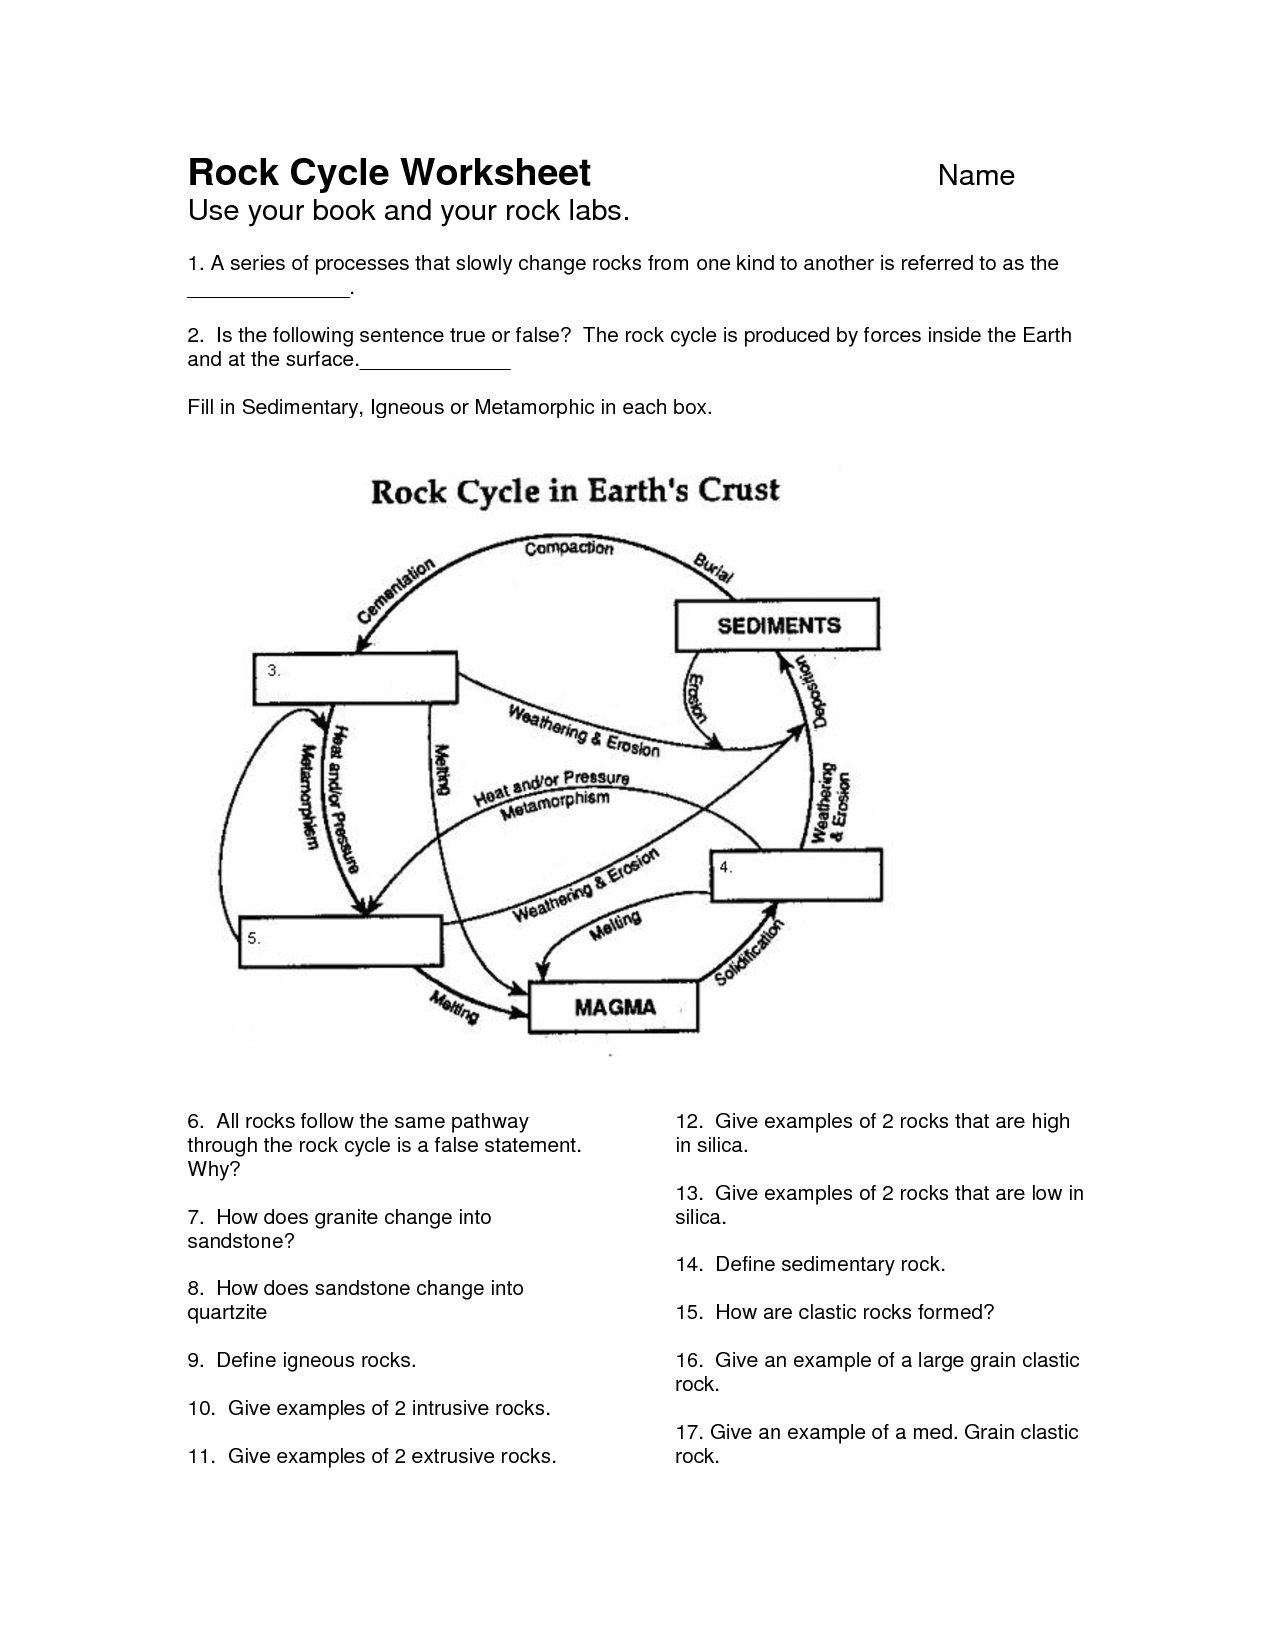 Rock Cycle Worksheet Answers Image